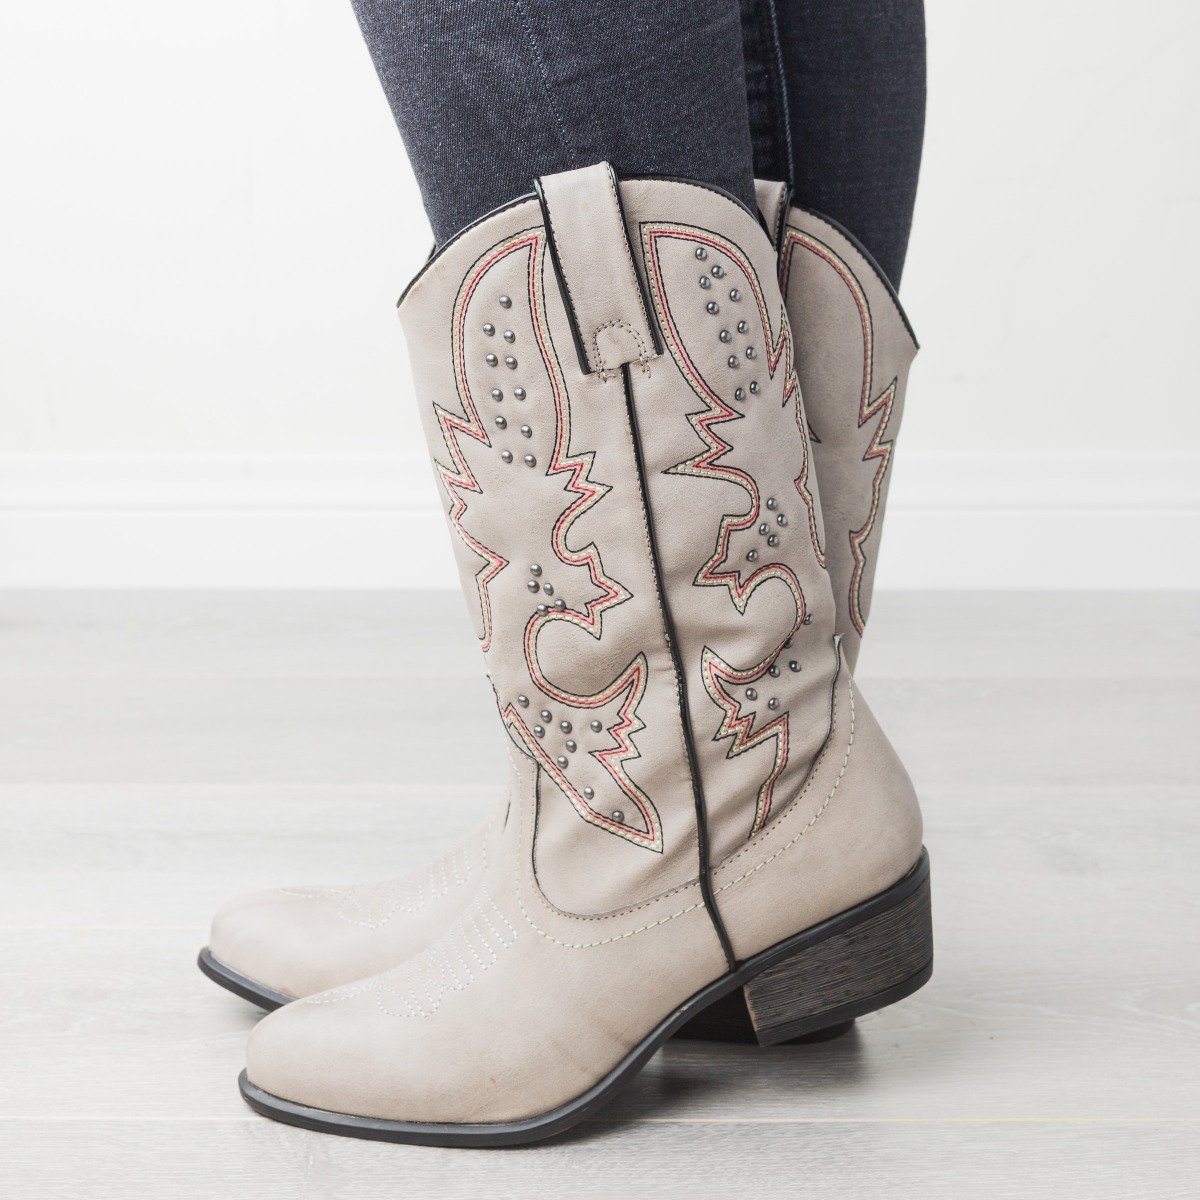 white studded cowboy boots